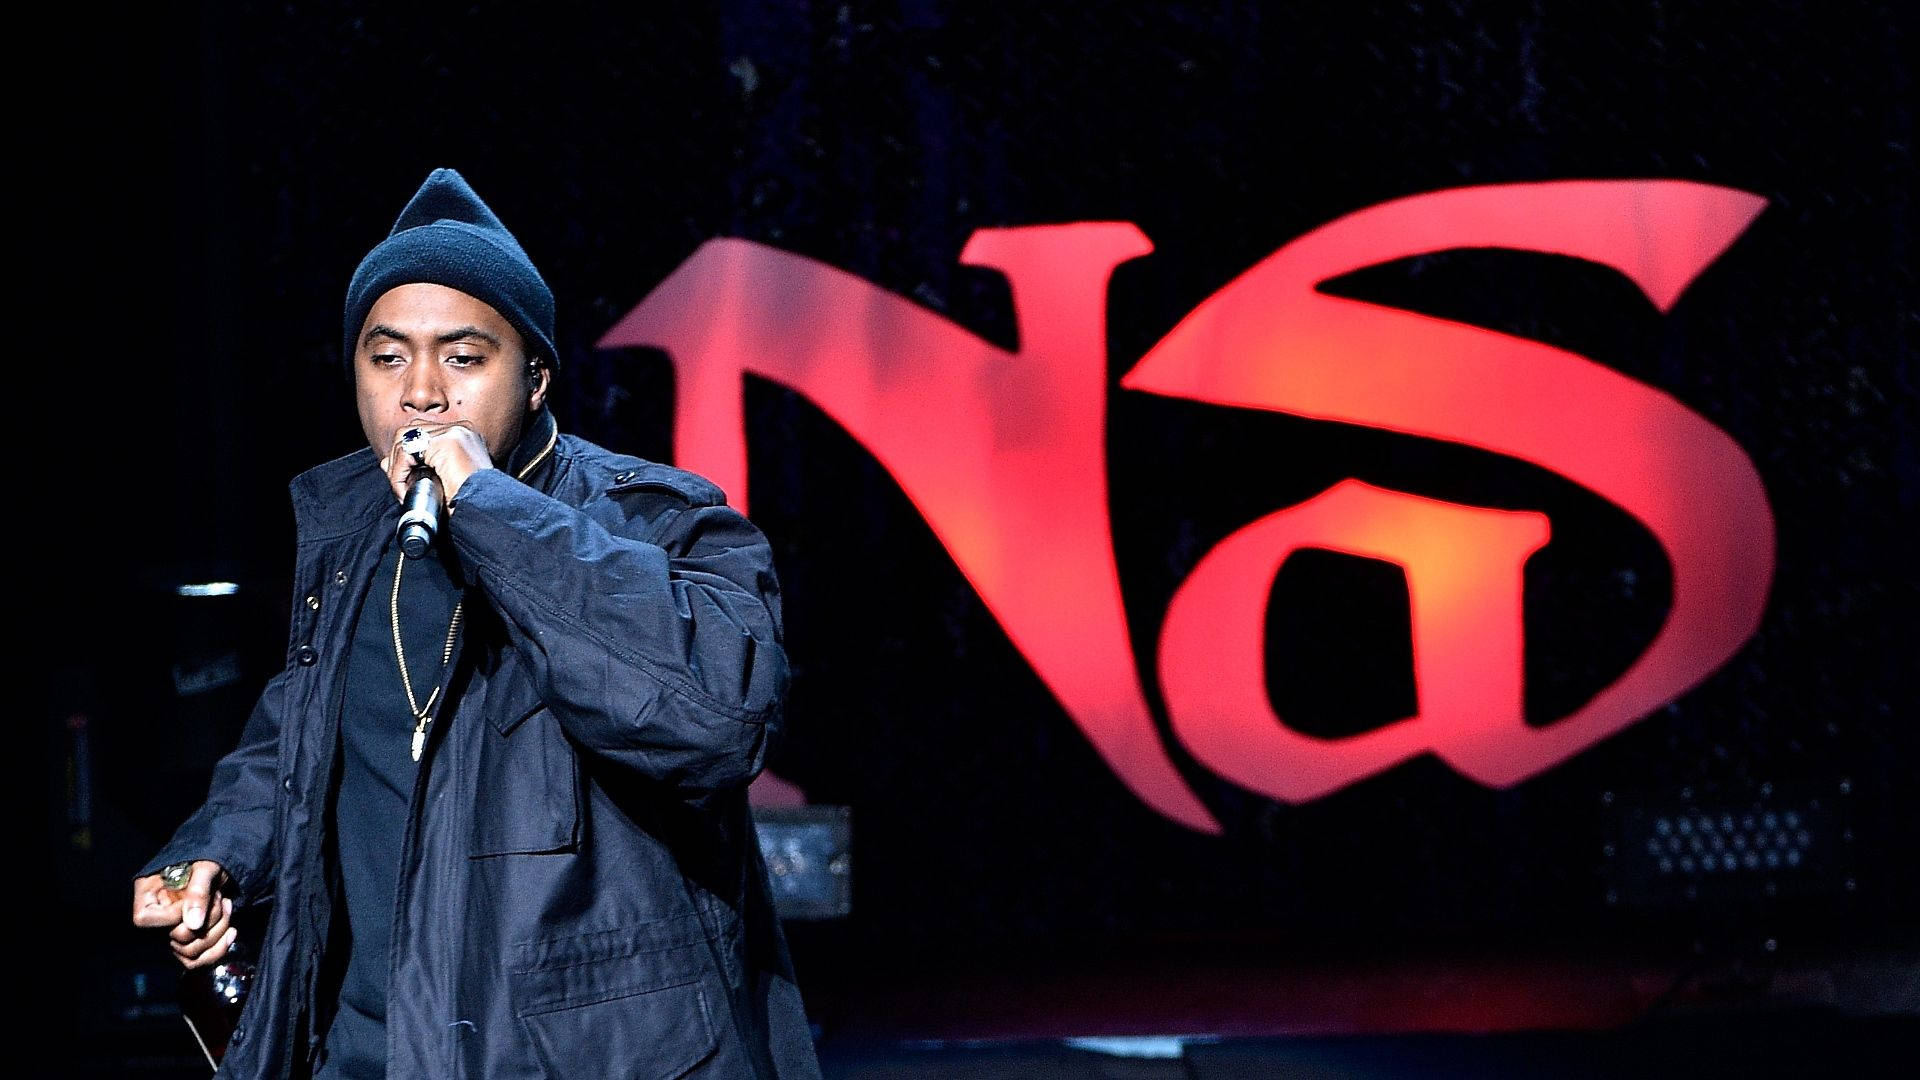 The legendary rapper Nas delivering a powerful performance onstage Wallpaper